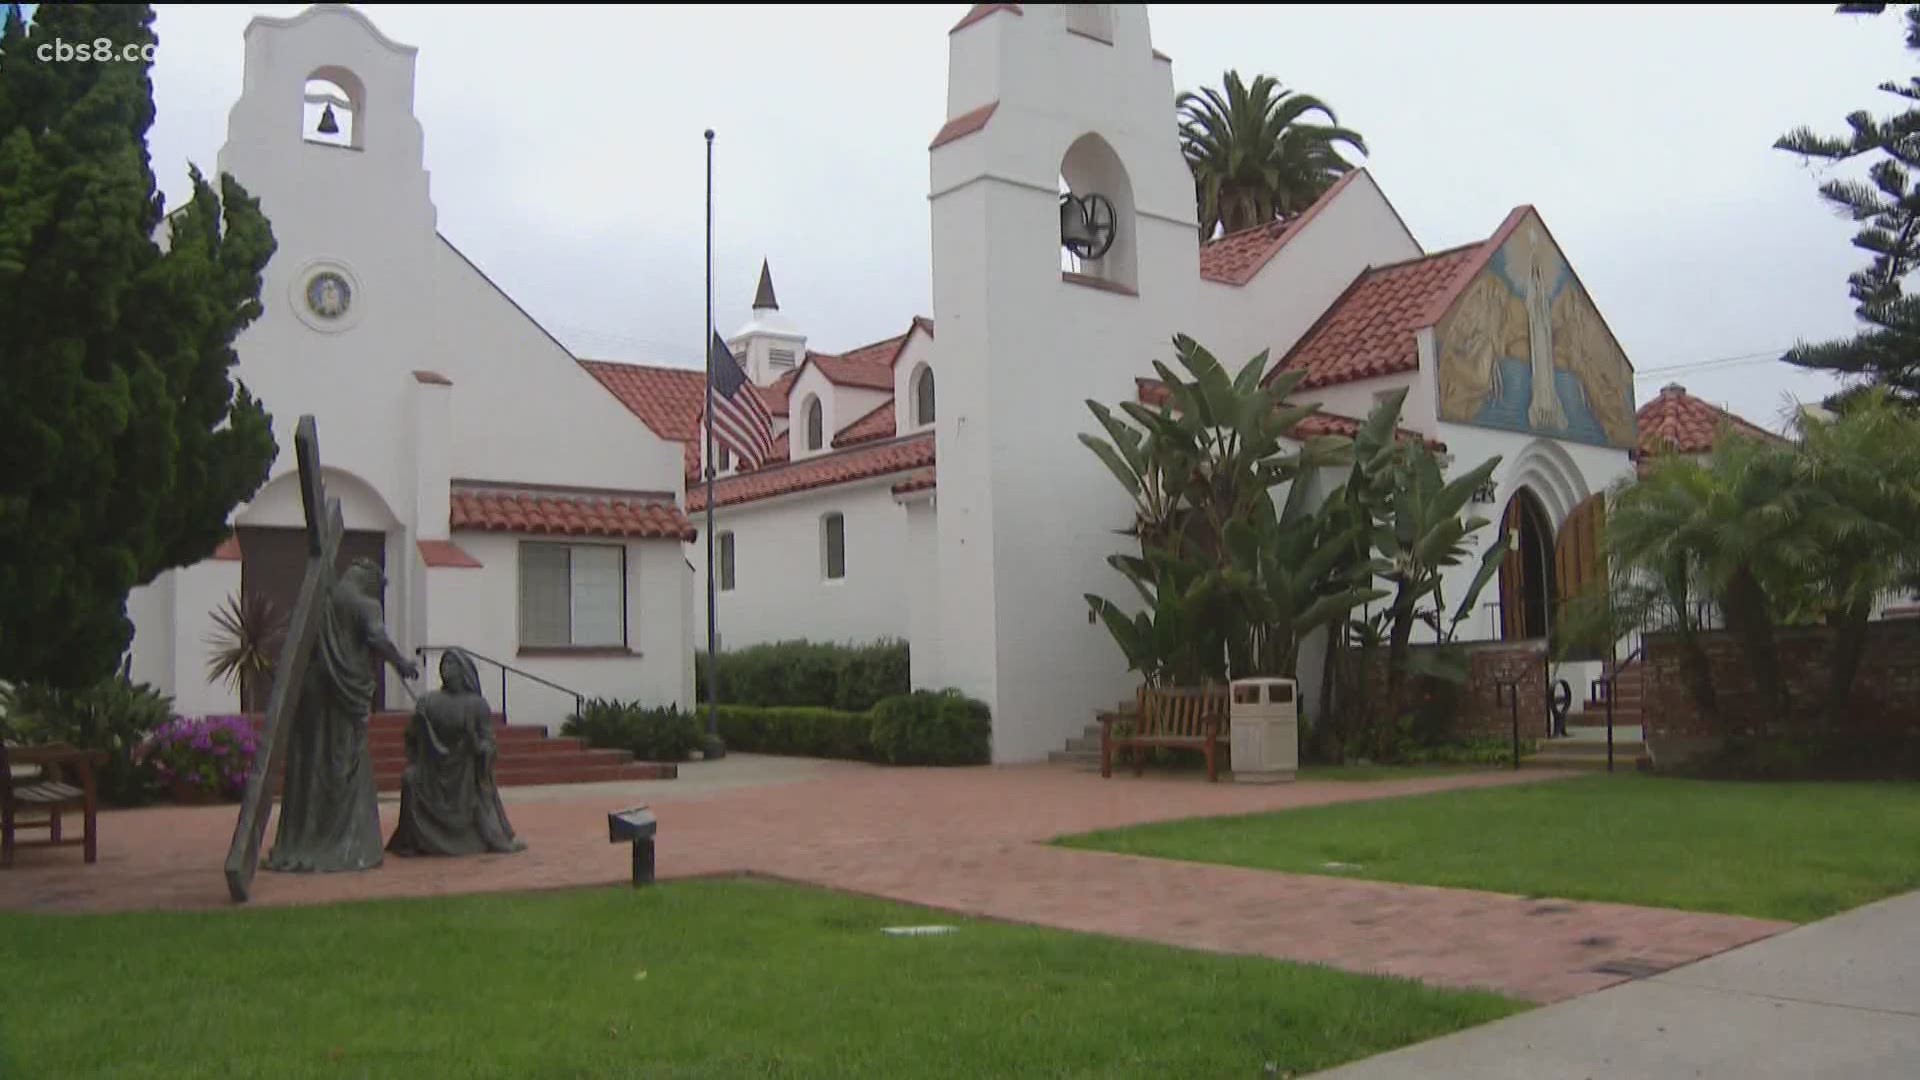 One San Diego church says it plans to reopen on June 8, but with safety modifications.